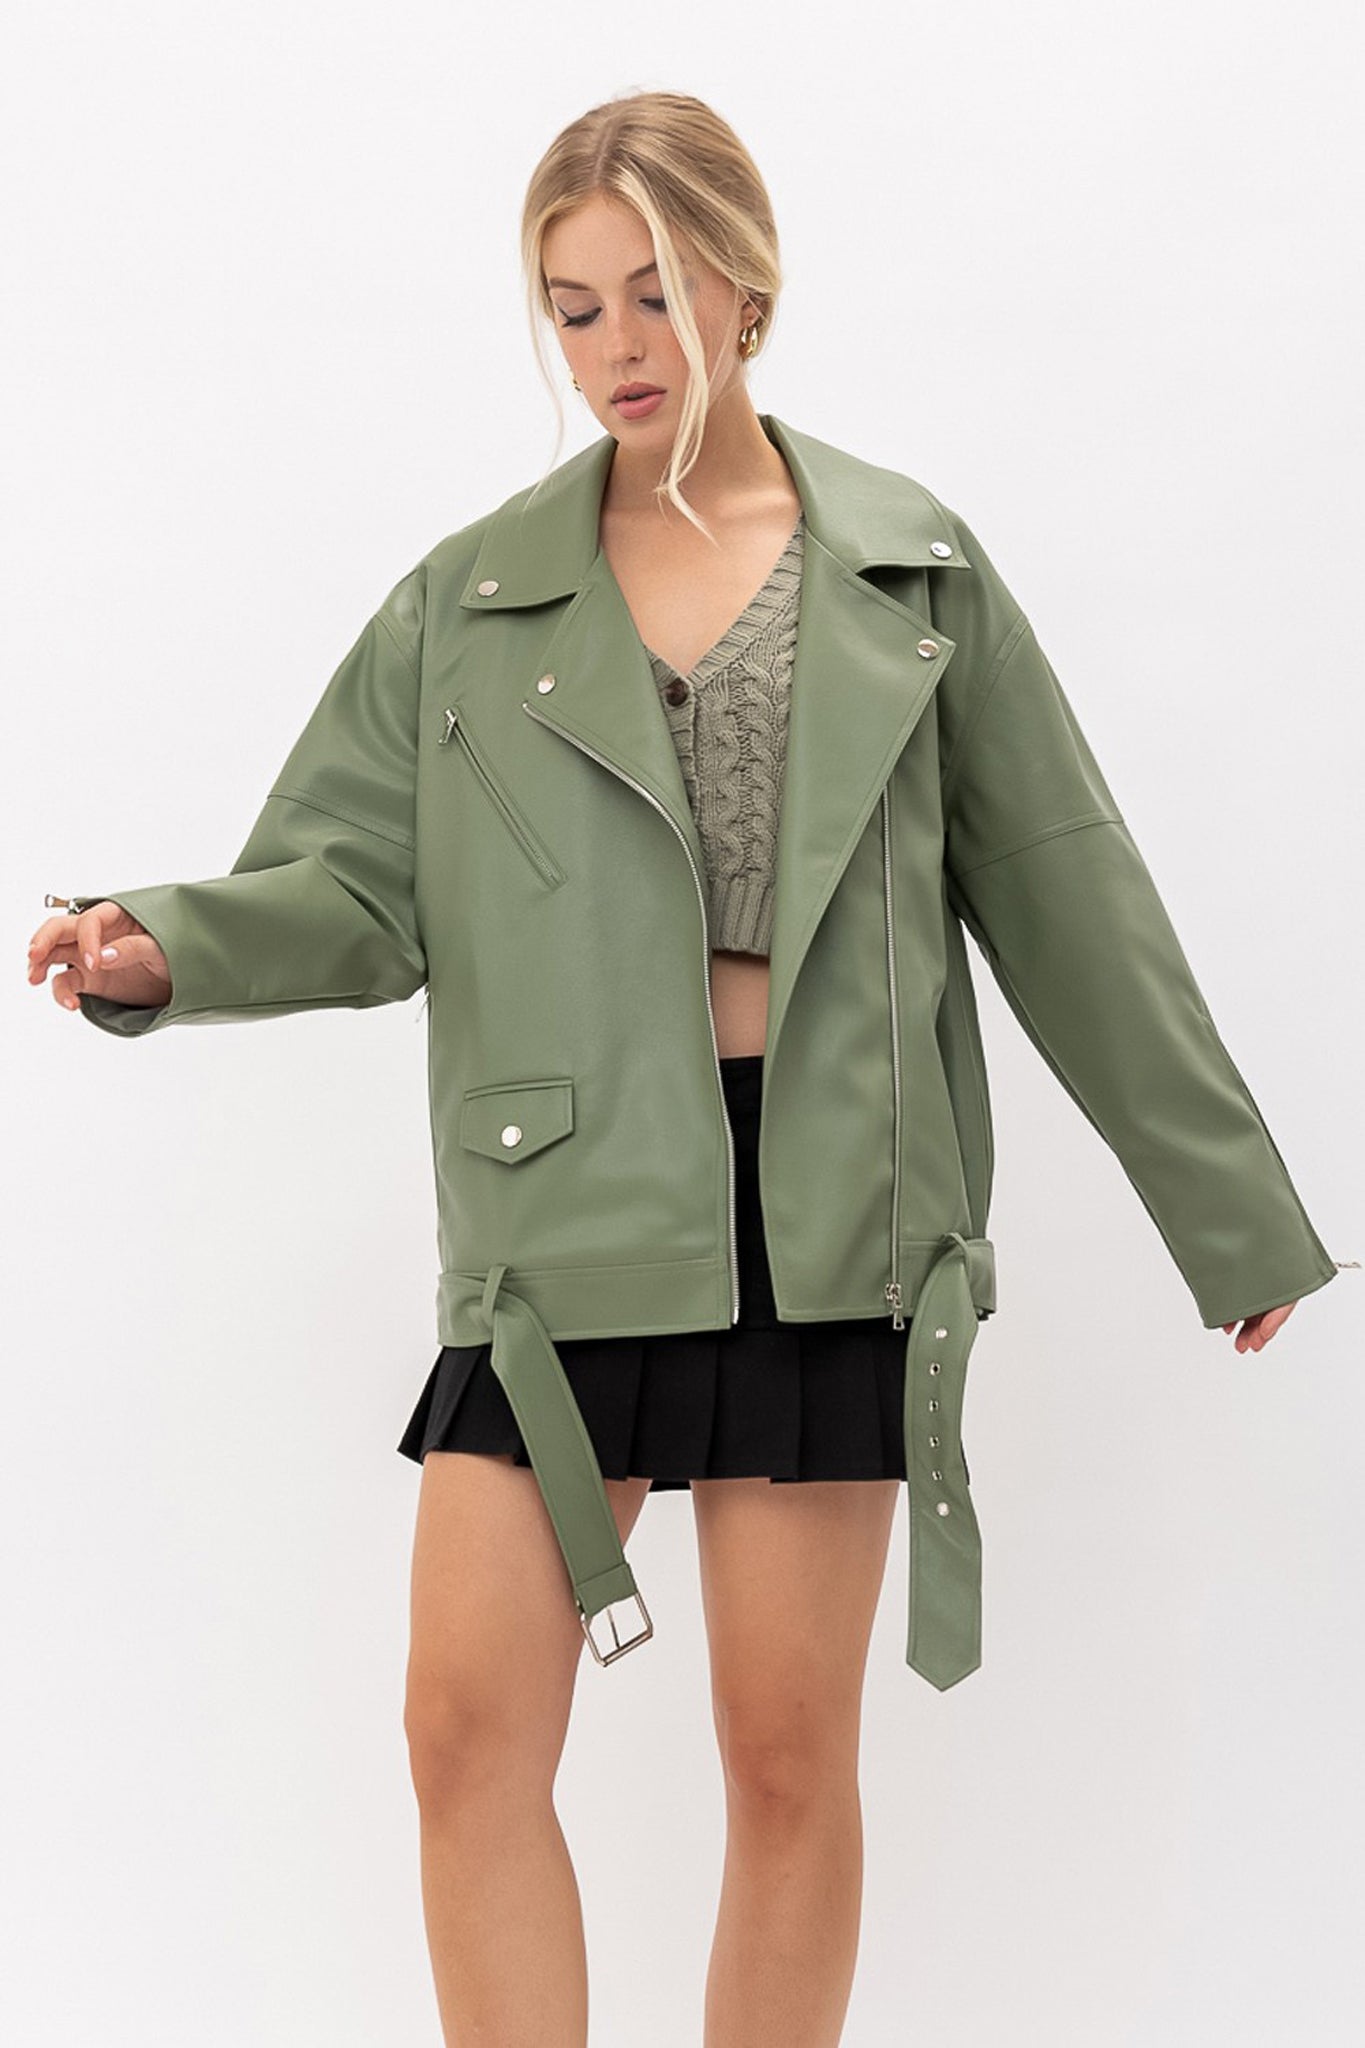 View 3 of Mozo Oversized Biker Jacket in Light Olive, a Jackets from Larrea Cove. Detail: .